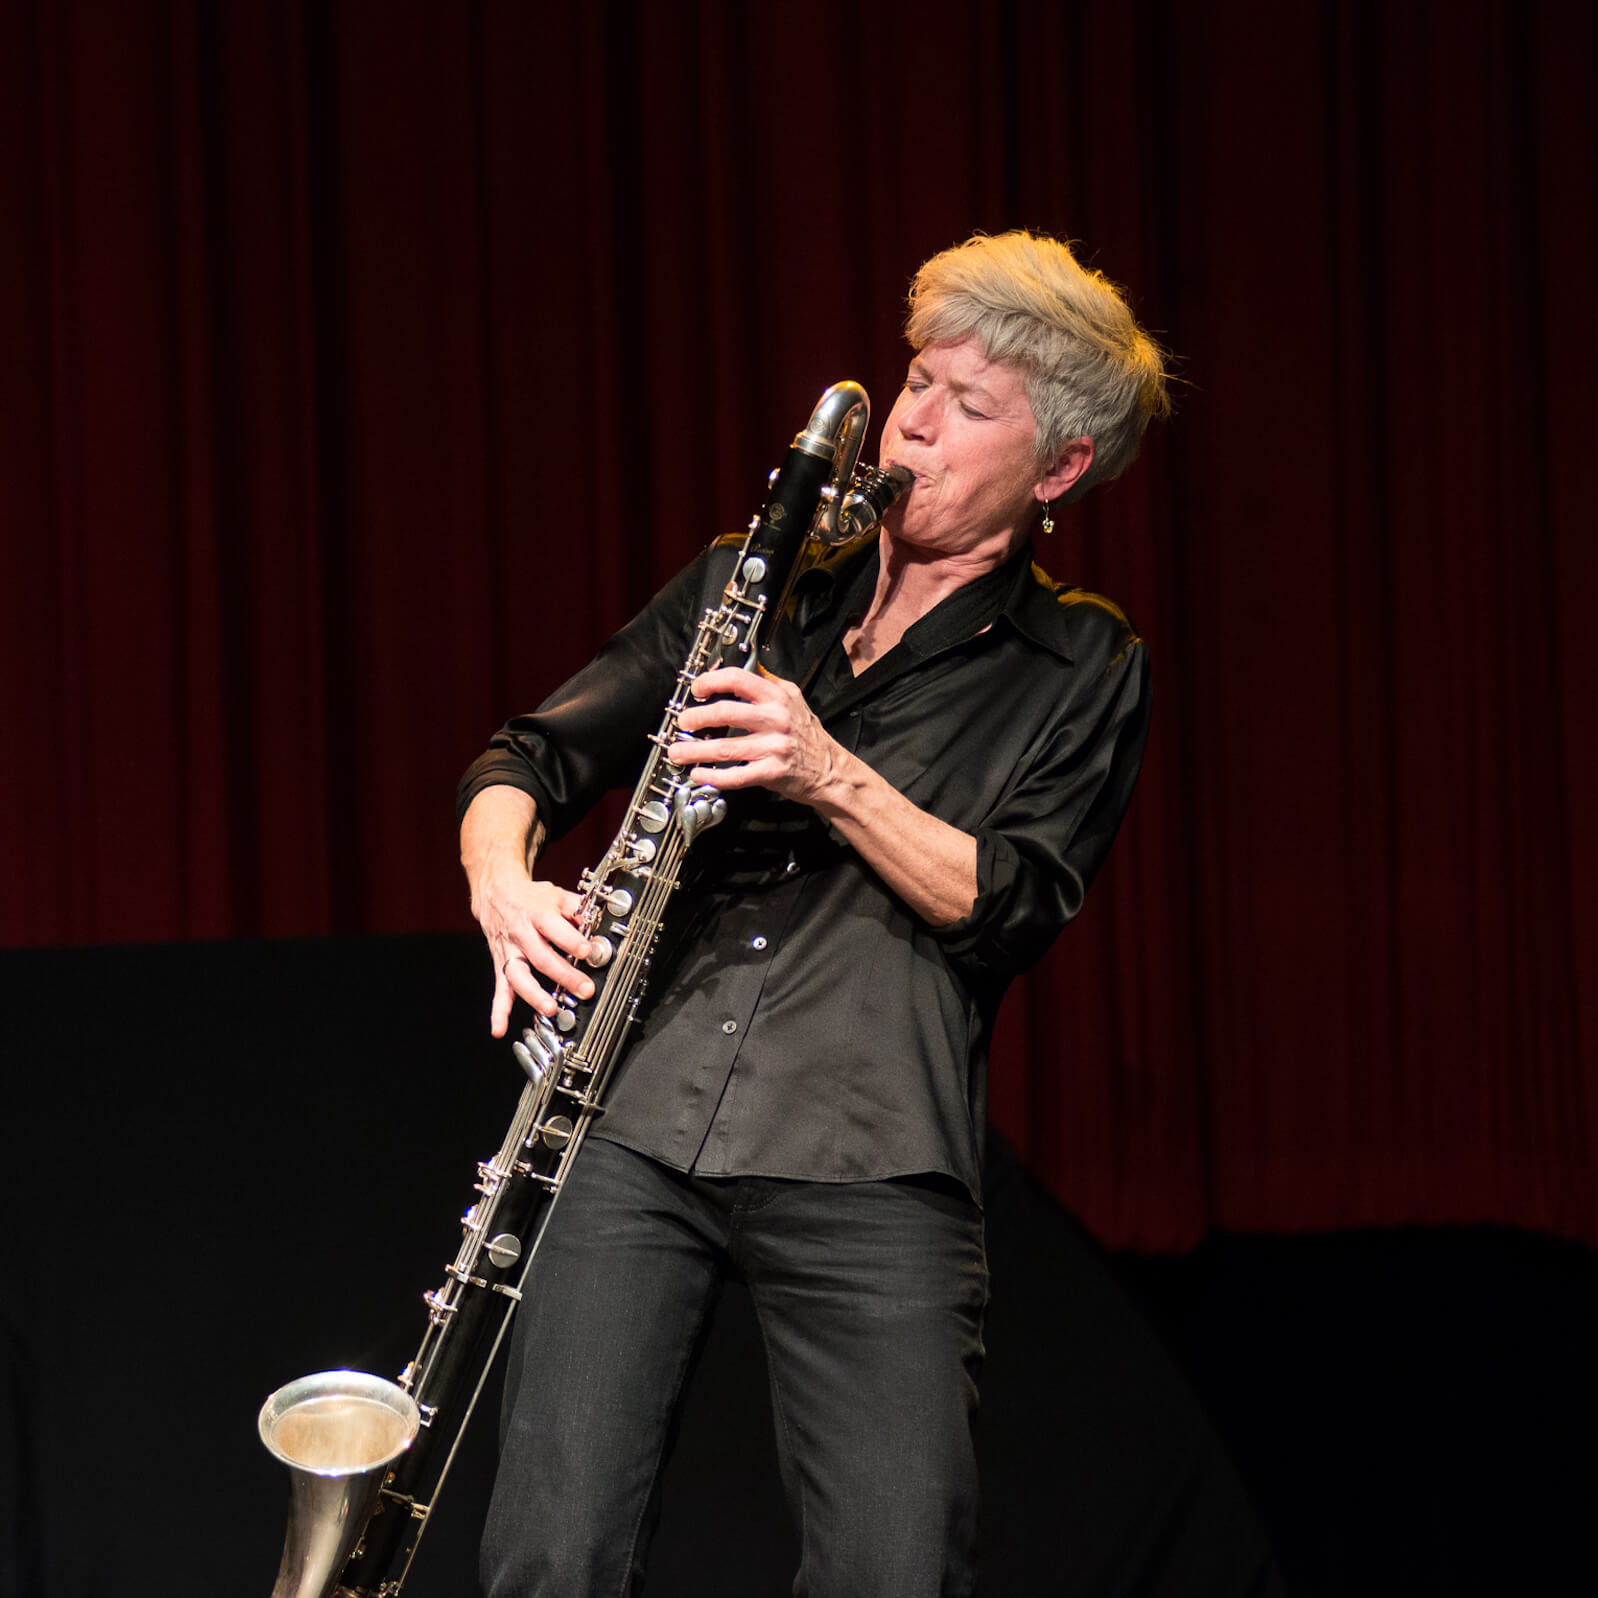 Lori Freedman in a black shirt and pants, playing the clarinet